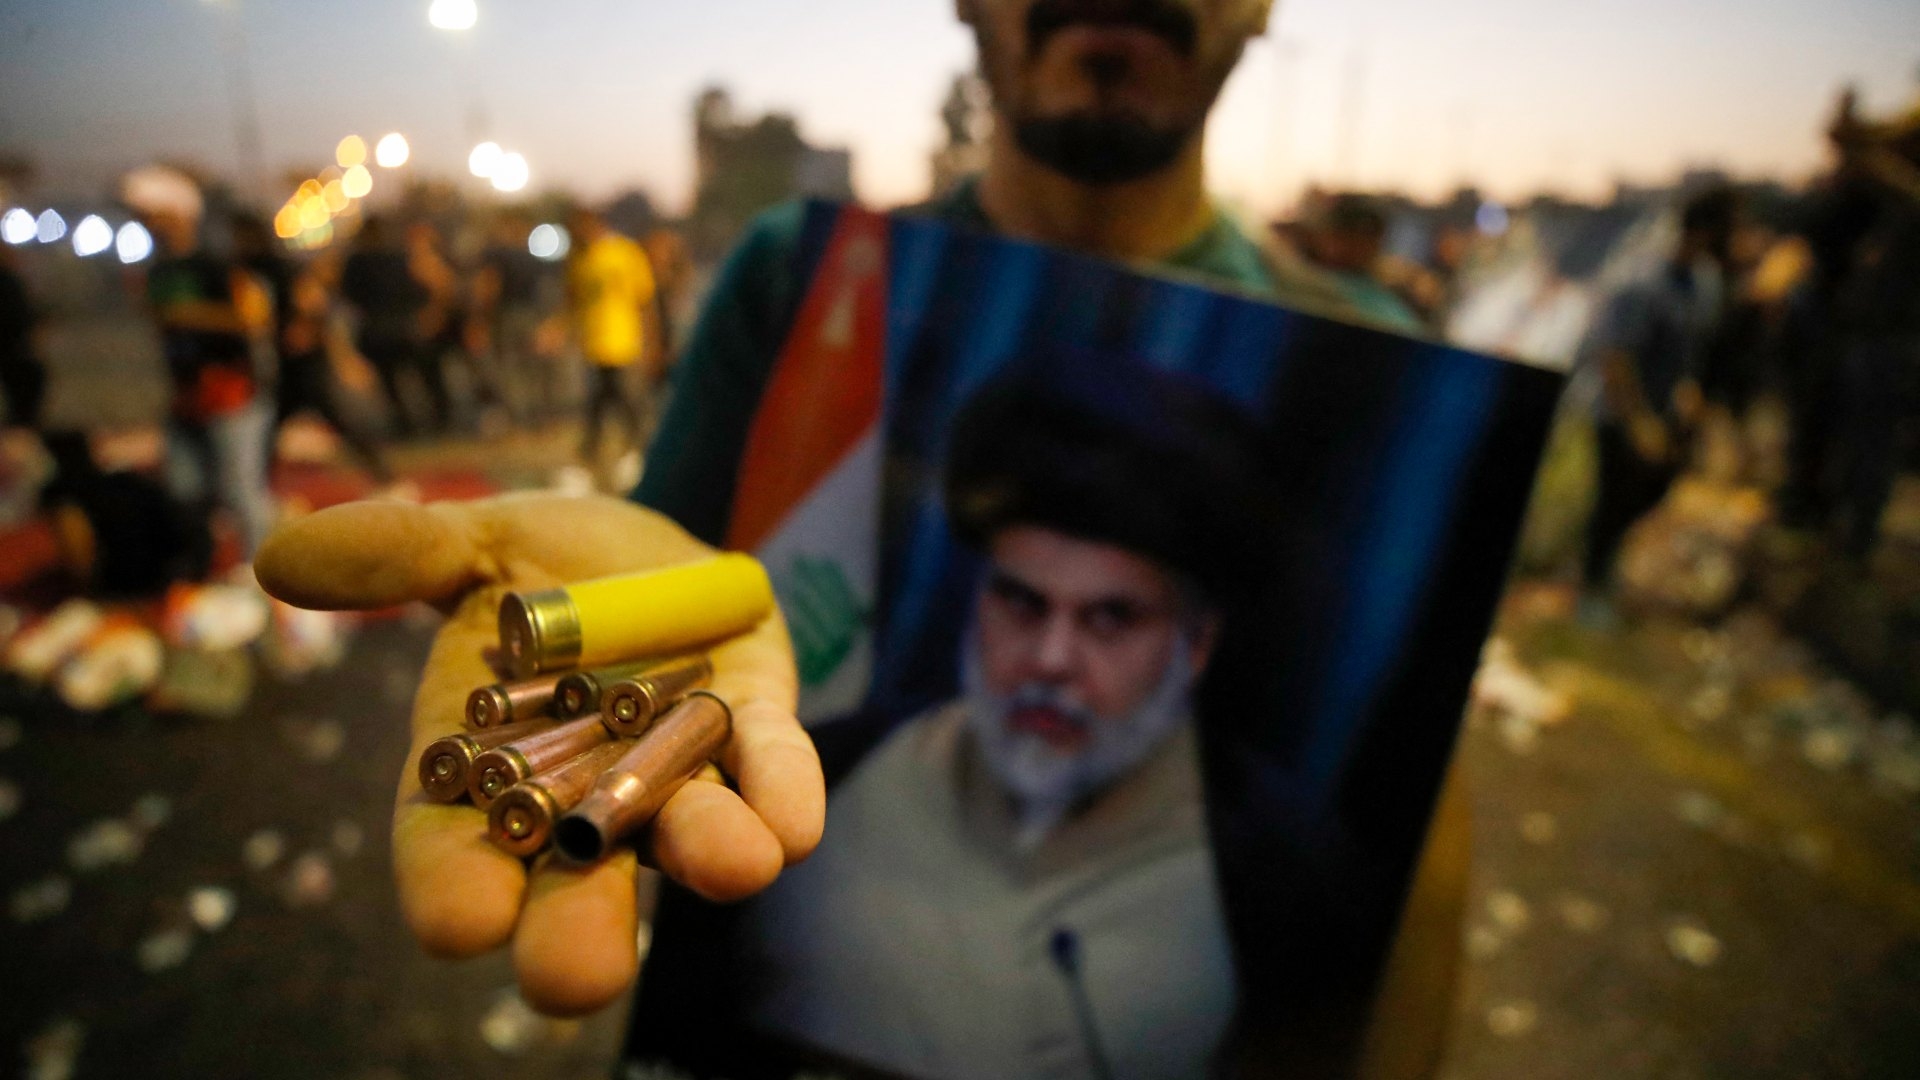 A supporter of Iraqi Shiite cleric Moqtada Sadr carries bullet casings and a spent shotgun shell in the capital Baghdad, on 29 August 2022